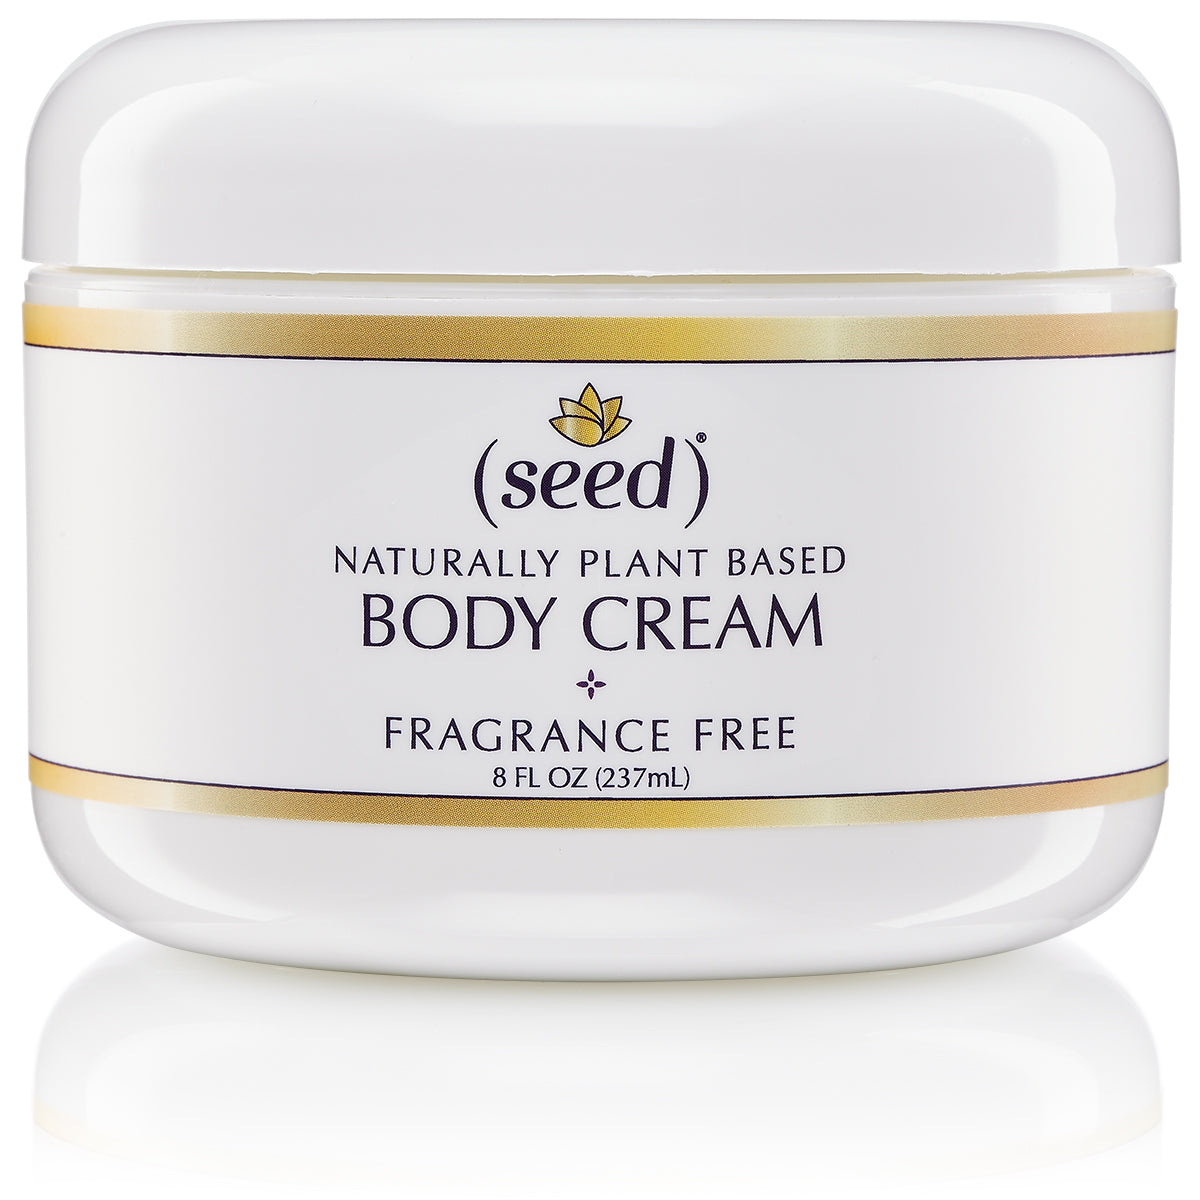 Seed Fragrance Free Silky and Rich Body Cream with grape seed oil, shea butter and green tea extract